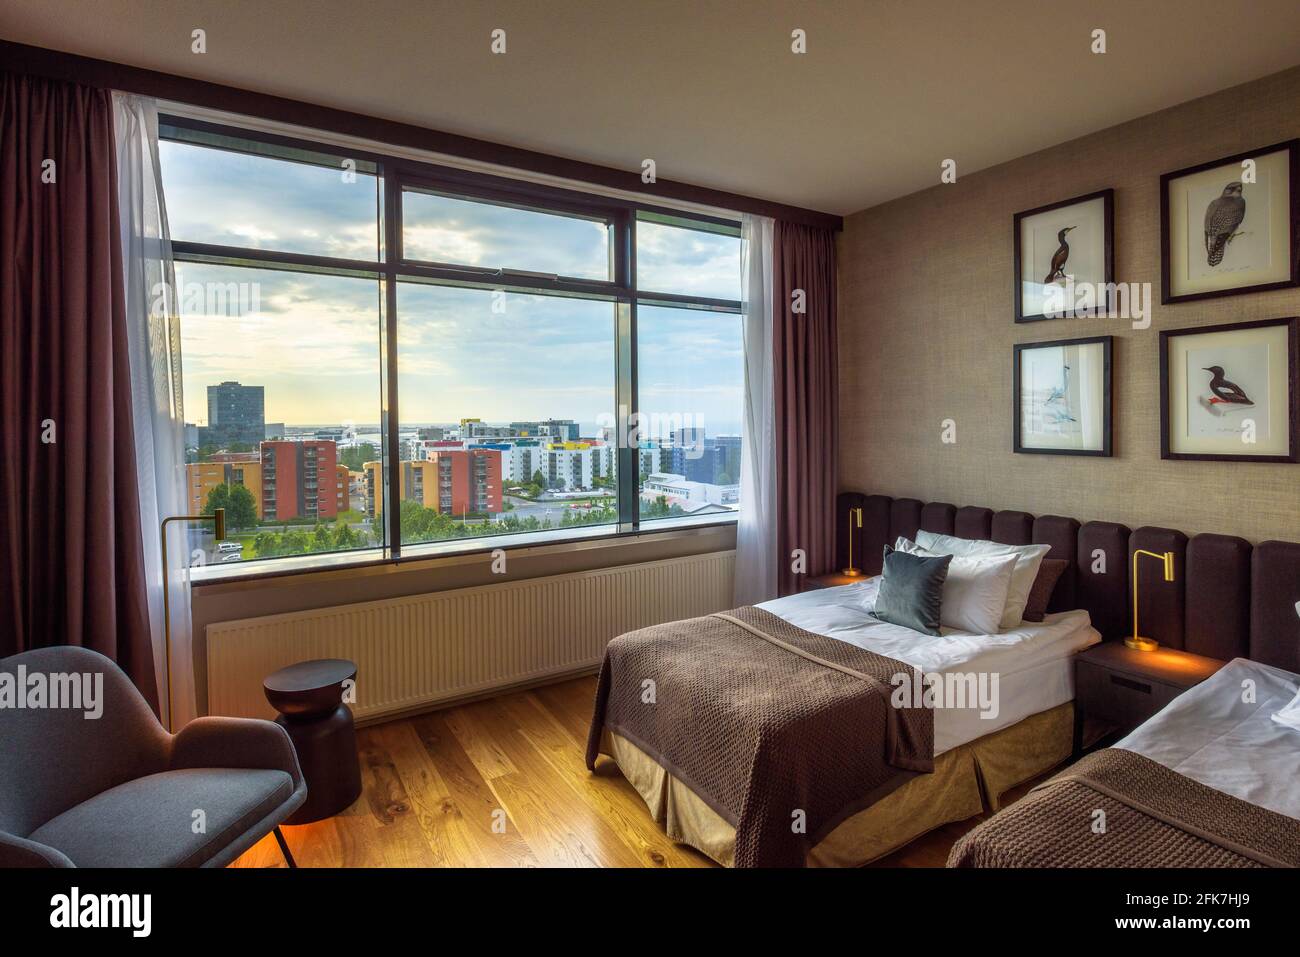 Interior of a room with city view in Grand Hotel Reykjavik, Iceland Stock Photo